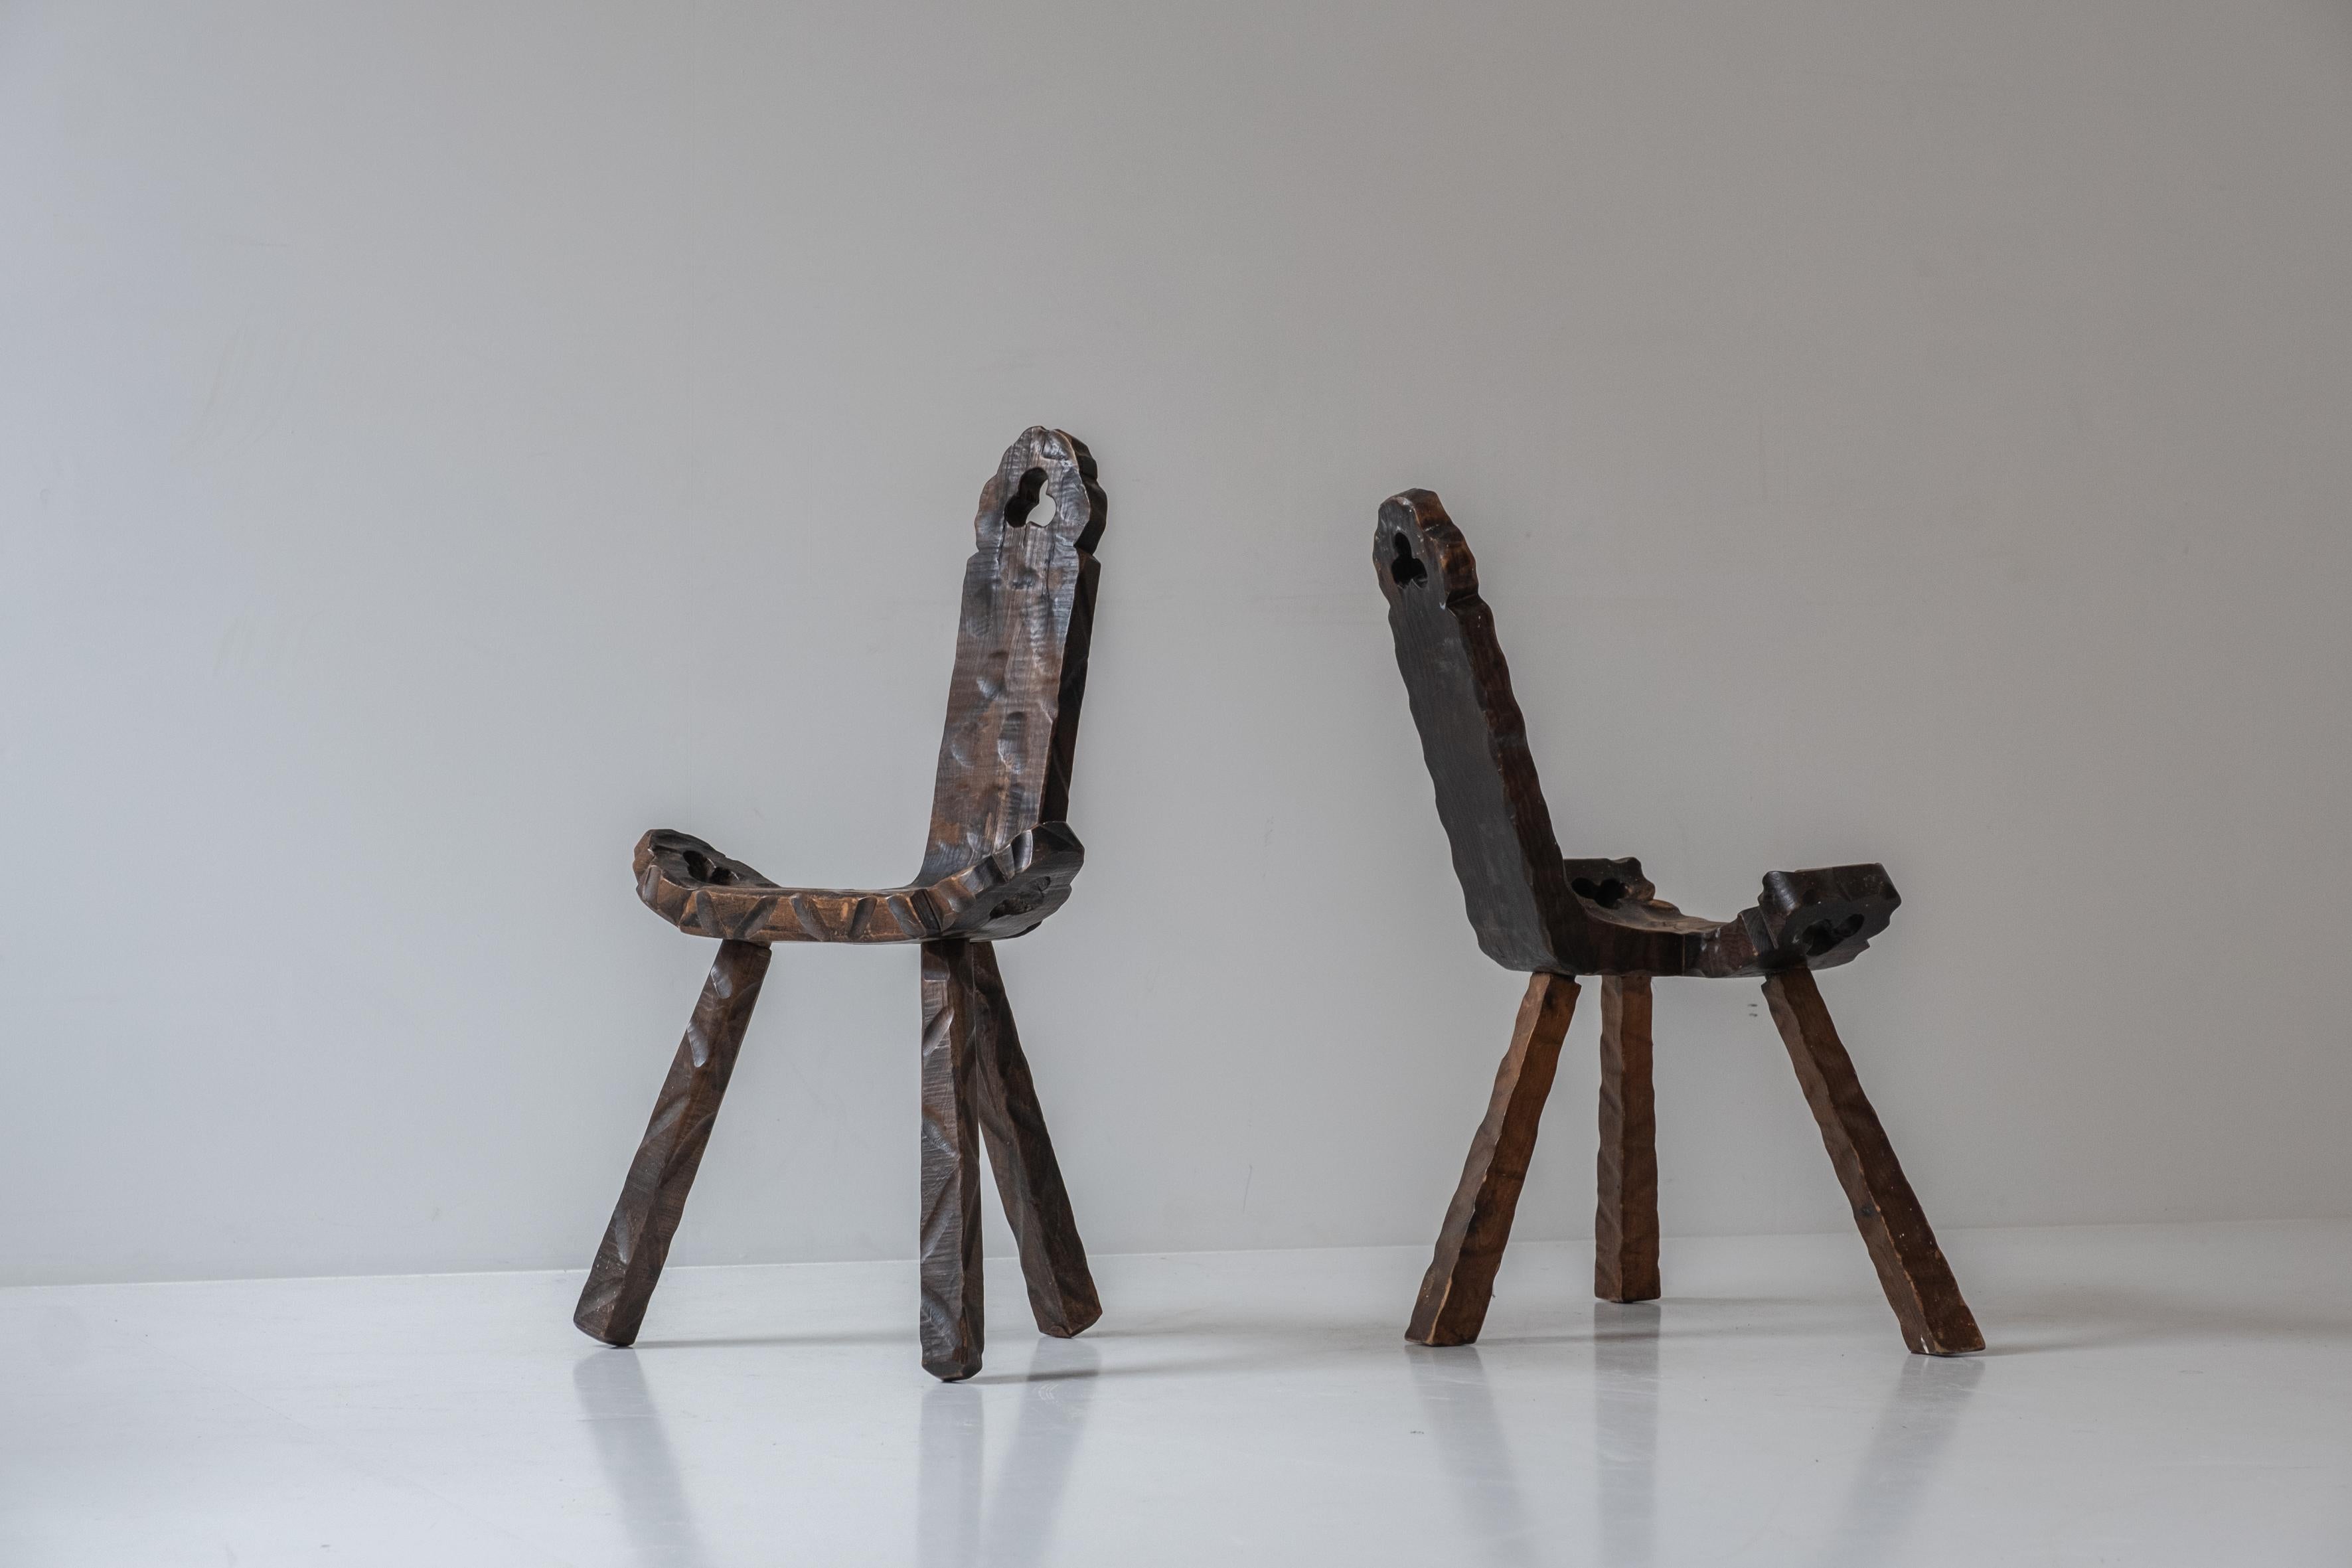 Wood Set of 2 Brutalist tripod stools from Spain, designed in the 1960s. 